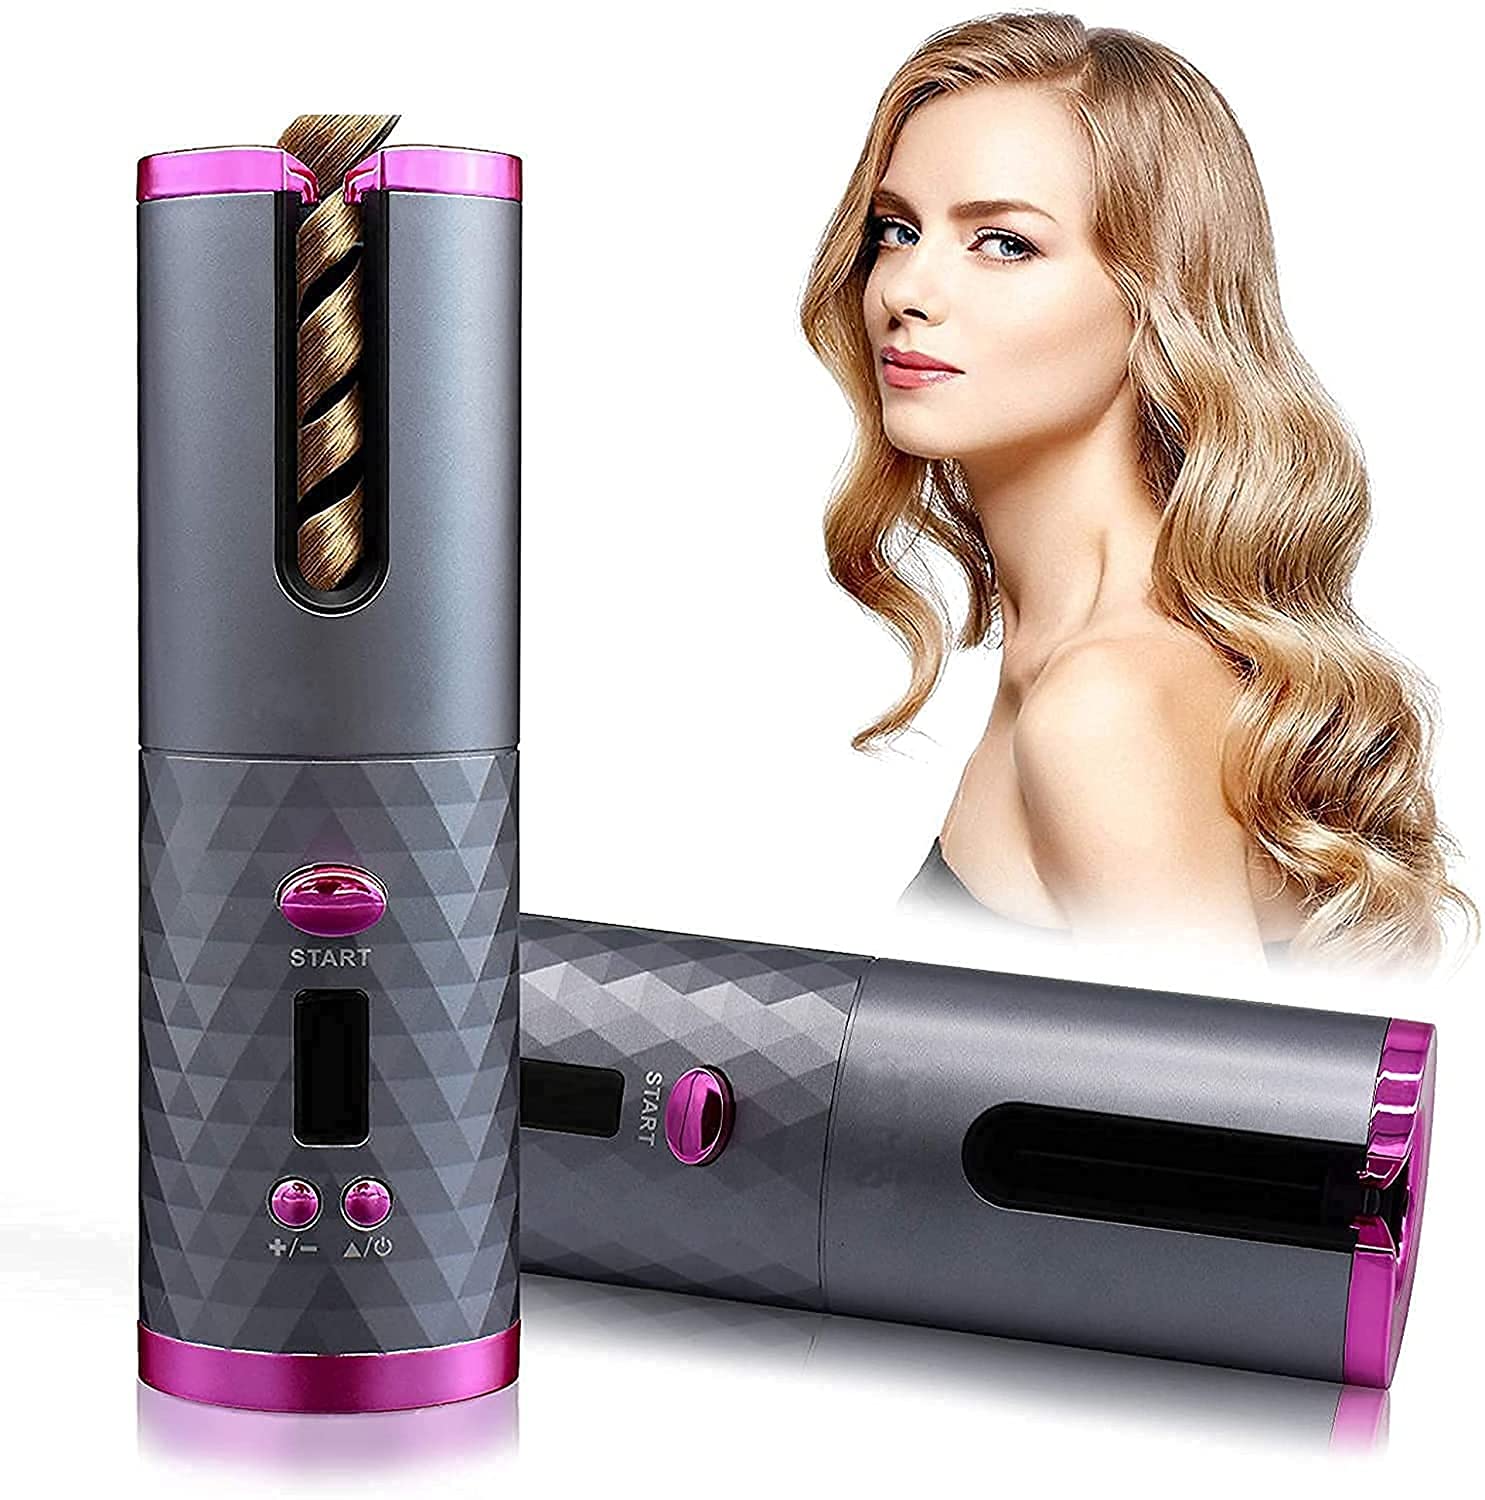 Veentus-Dealsure-Hair-Curler-Hair-Curling-Iron-Cordless-Automatic-Curler-Silky-Curls-Fast-Heating-Wireless-Auto-Curler-with-Timer-Setting-and-6-Temperature.jpg